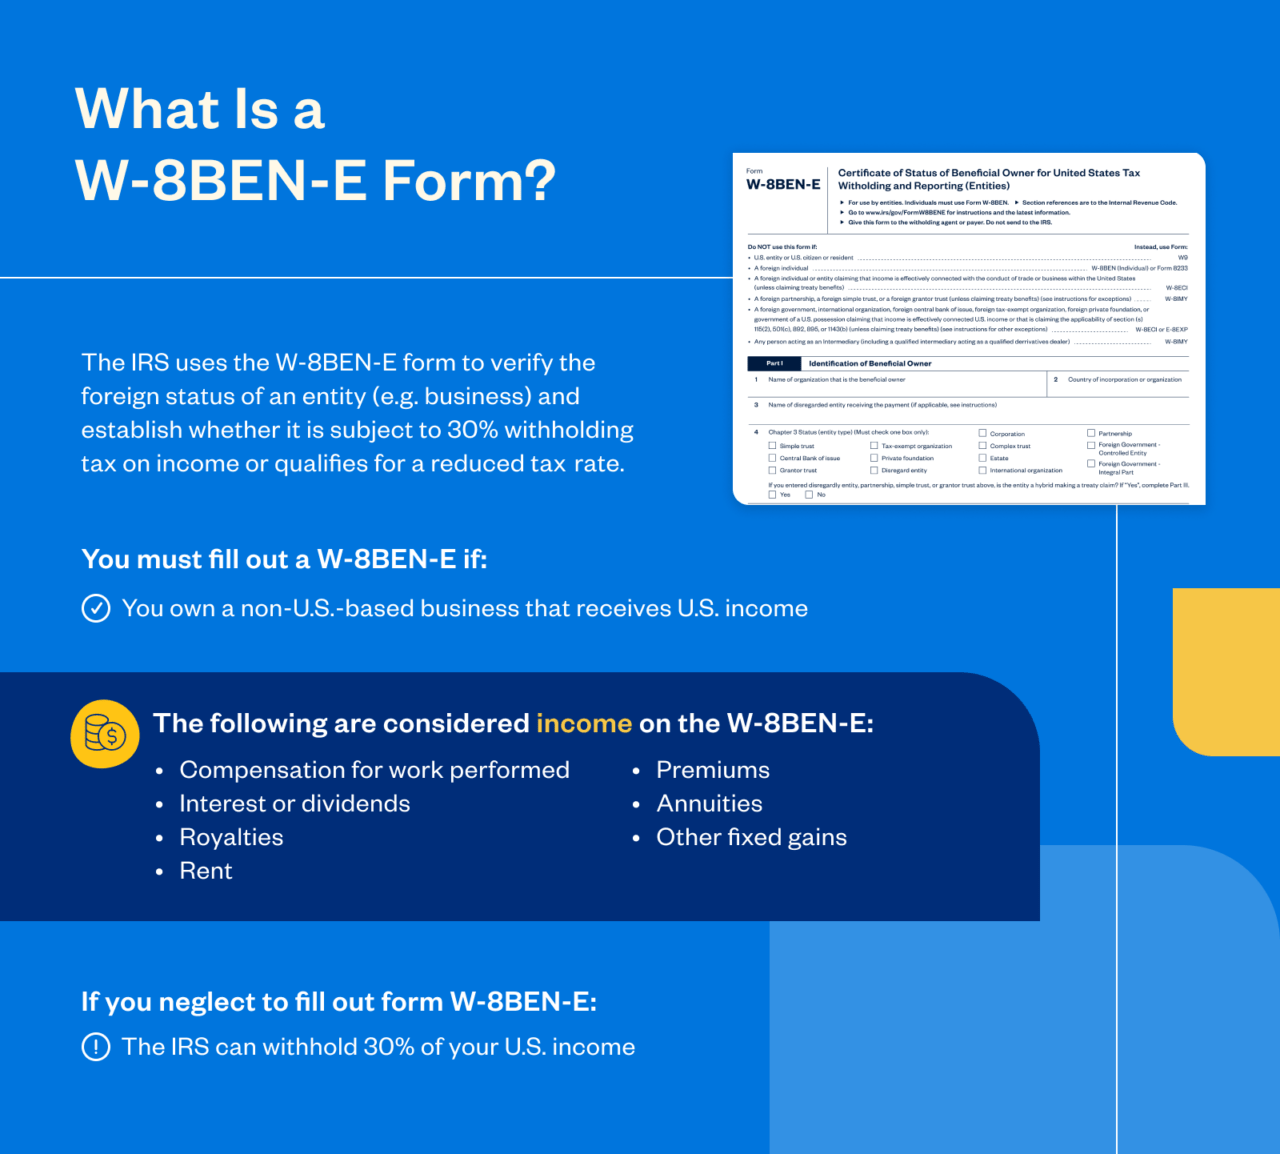 What Is Form W-8BEN-E?